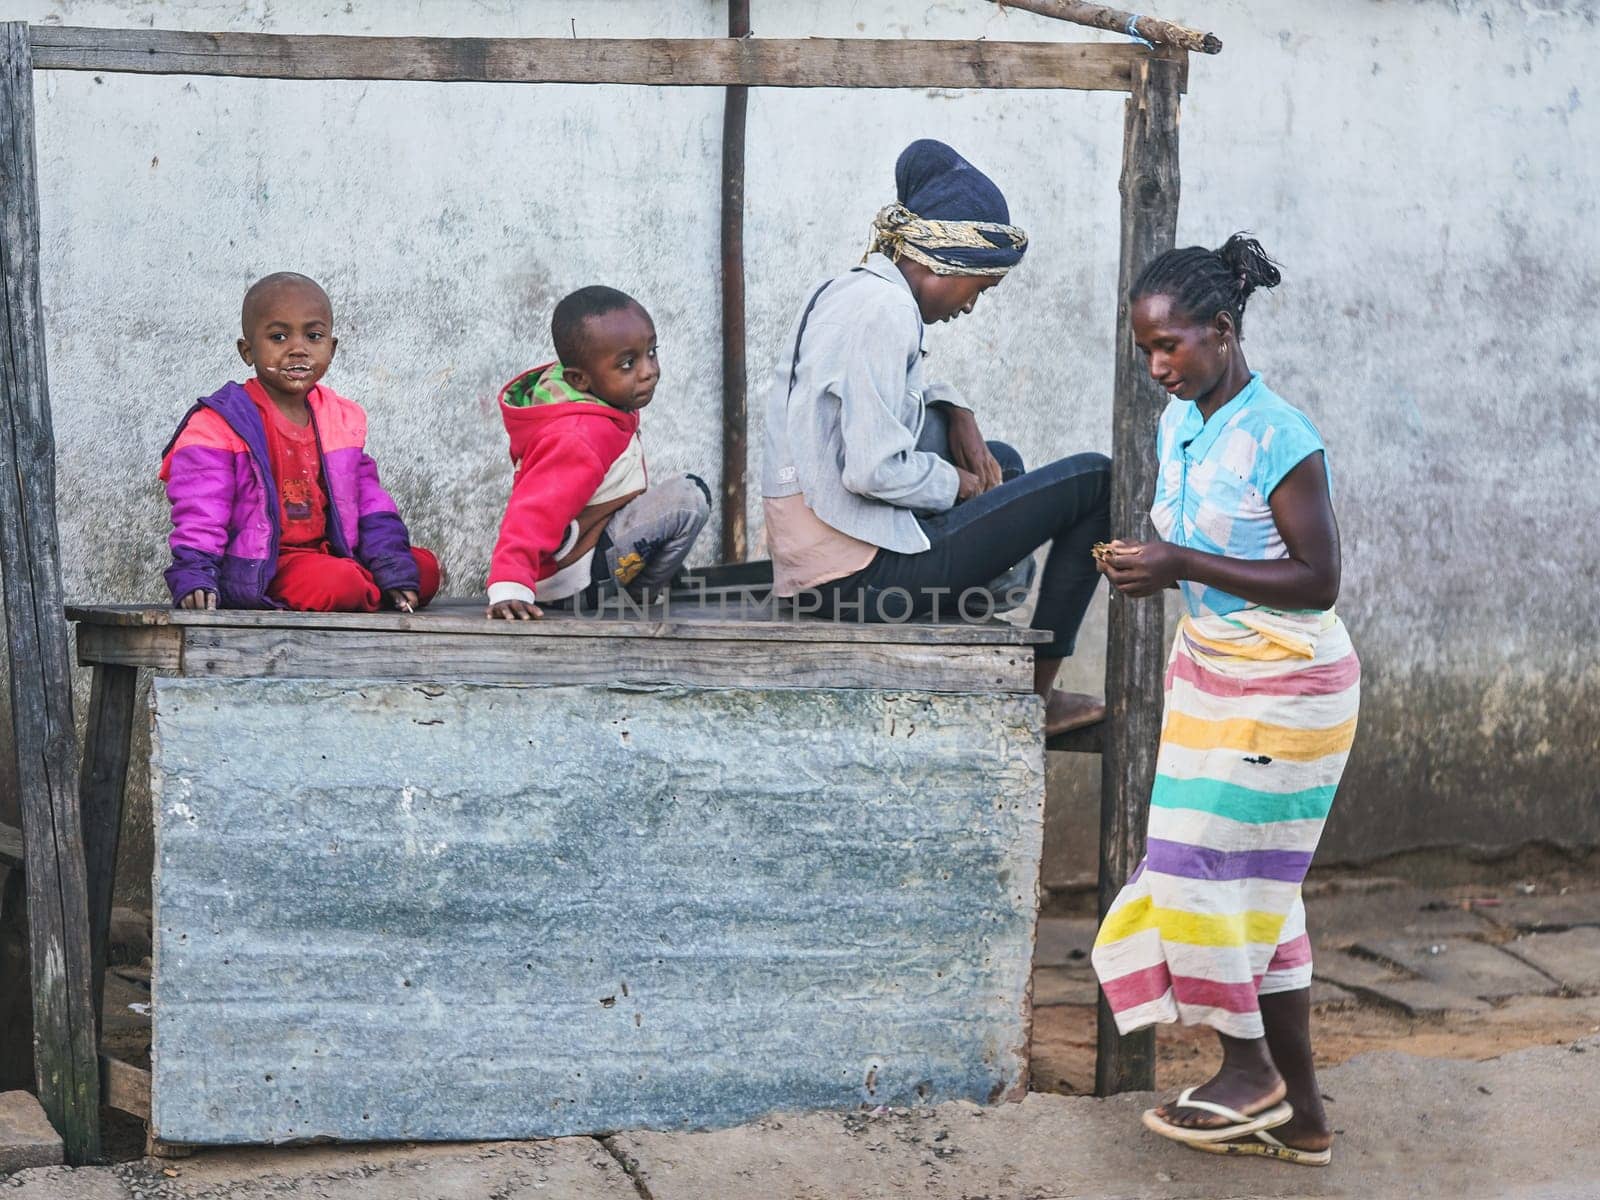 Ranohira, Madagascar - April 29, 2019: Four unknown Malagasy children playing next to unused wooden market stall, smallest sitting on top desk. Children in Madagascar are poor but cheerful by Ivanko